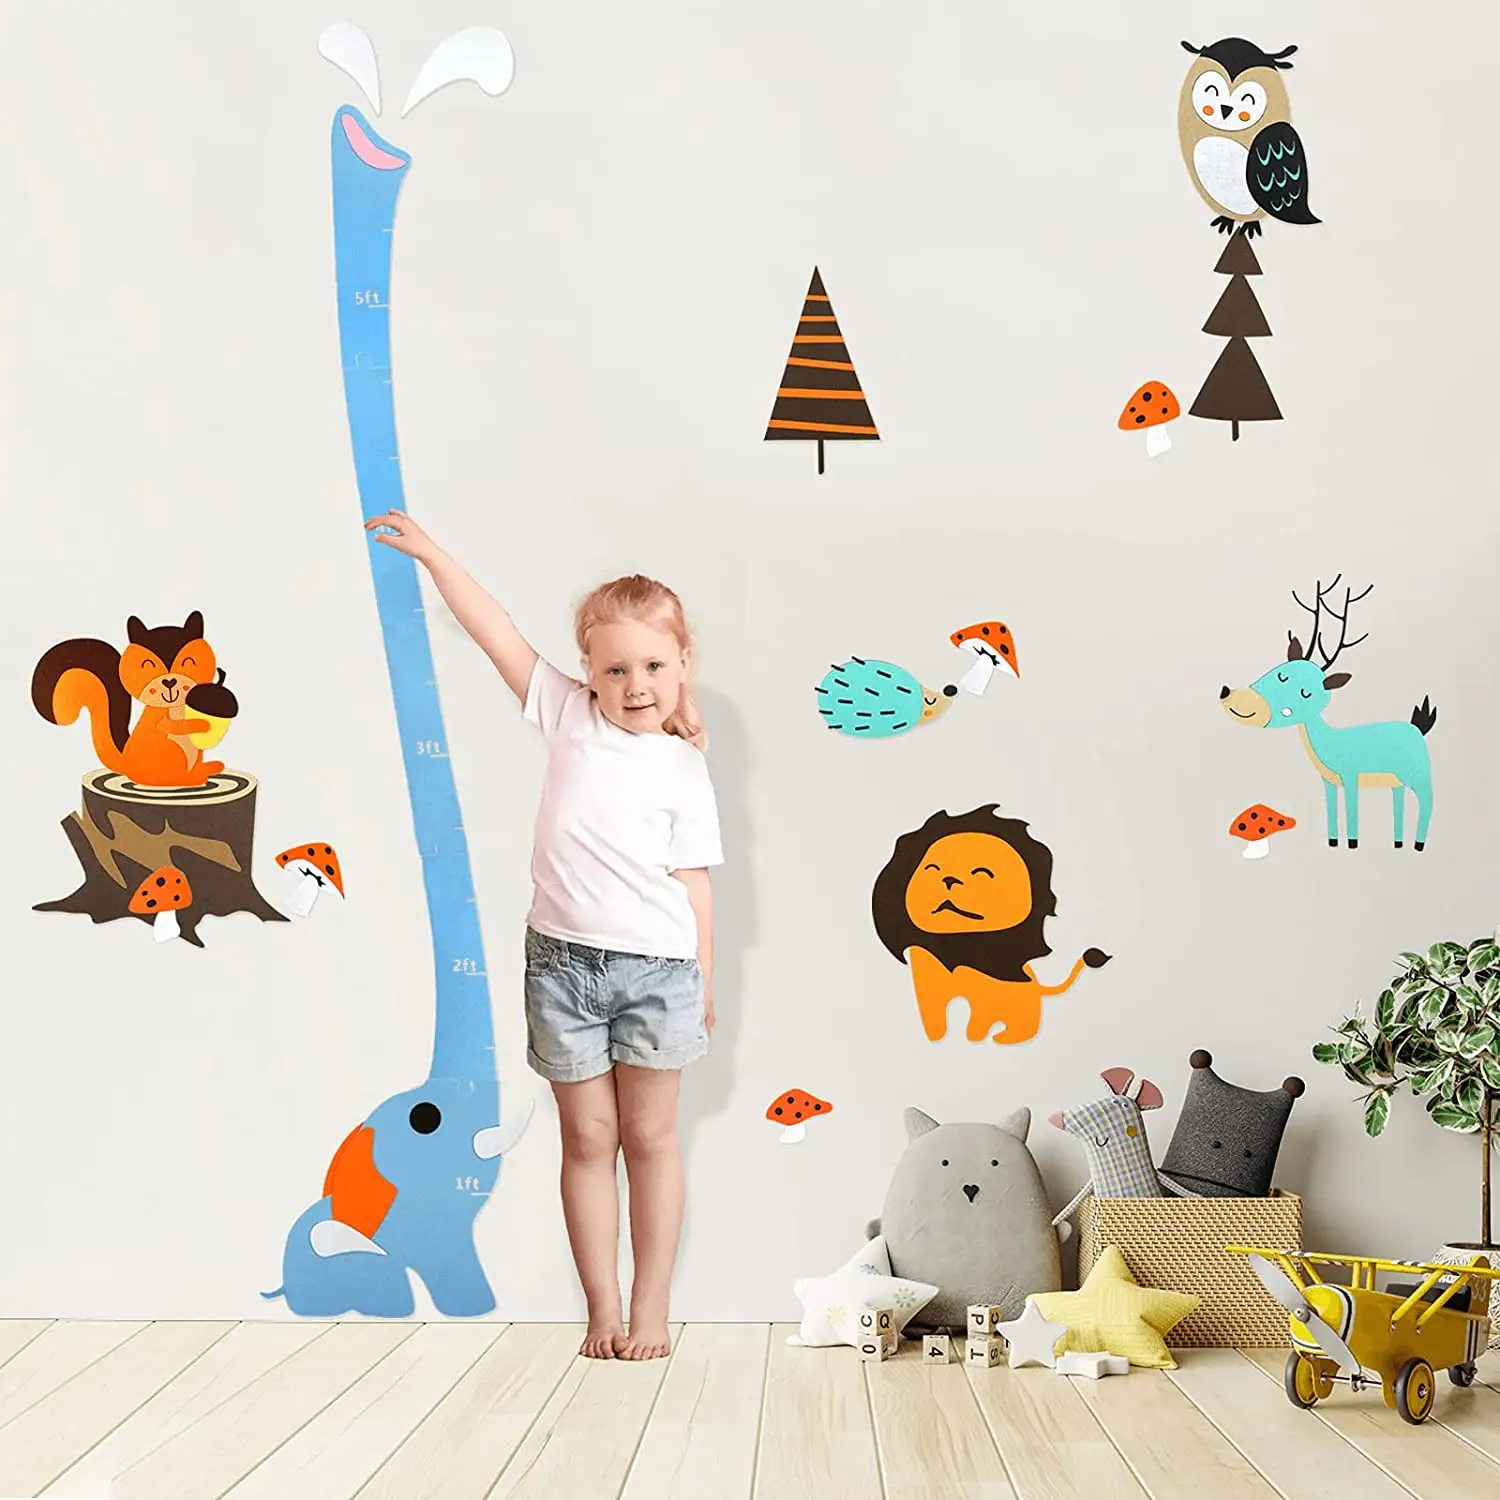 Kids Jungle Animal Wall Decals for Girls Boys Bedroom Felt Safari Animal Wall Stickers with Growth Chart Ruler for Nursery Decor